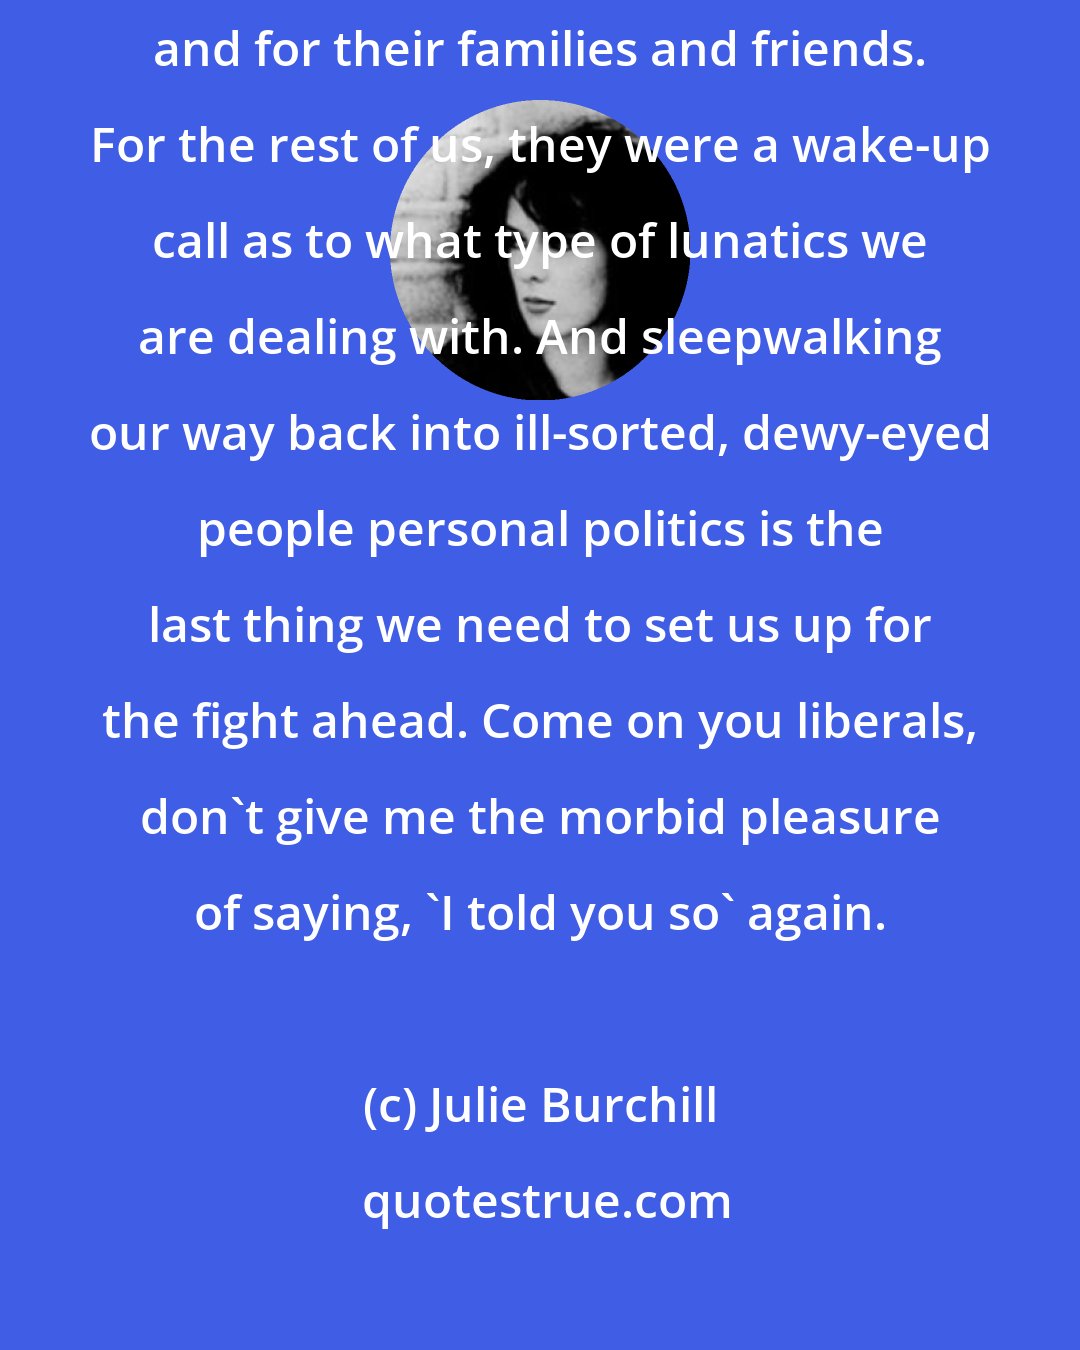 Julie Burchill: The terrorist attacks were a tragedy for the people who died or were injured, and for their families and friends. For the rest of us, they were a wake-up call as to what type of lunatics we are dealing with. And sleepwalking our way back into ill-sorted, dewy-eyed people personal politics is the last thing we need to set us up for the fight ahead. Come on you liberals, don't give me the morbid pleasure of saying, 'I told you so' again.